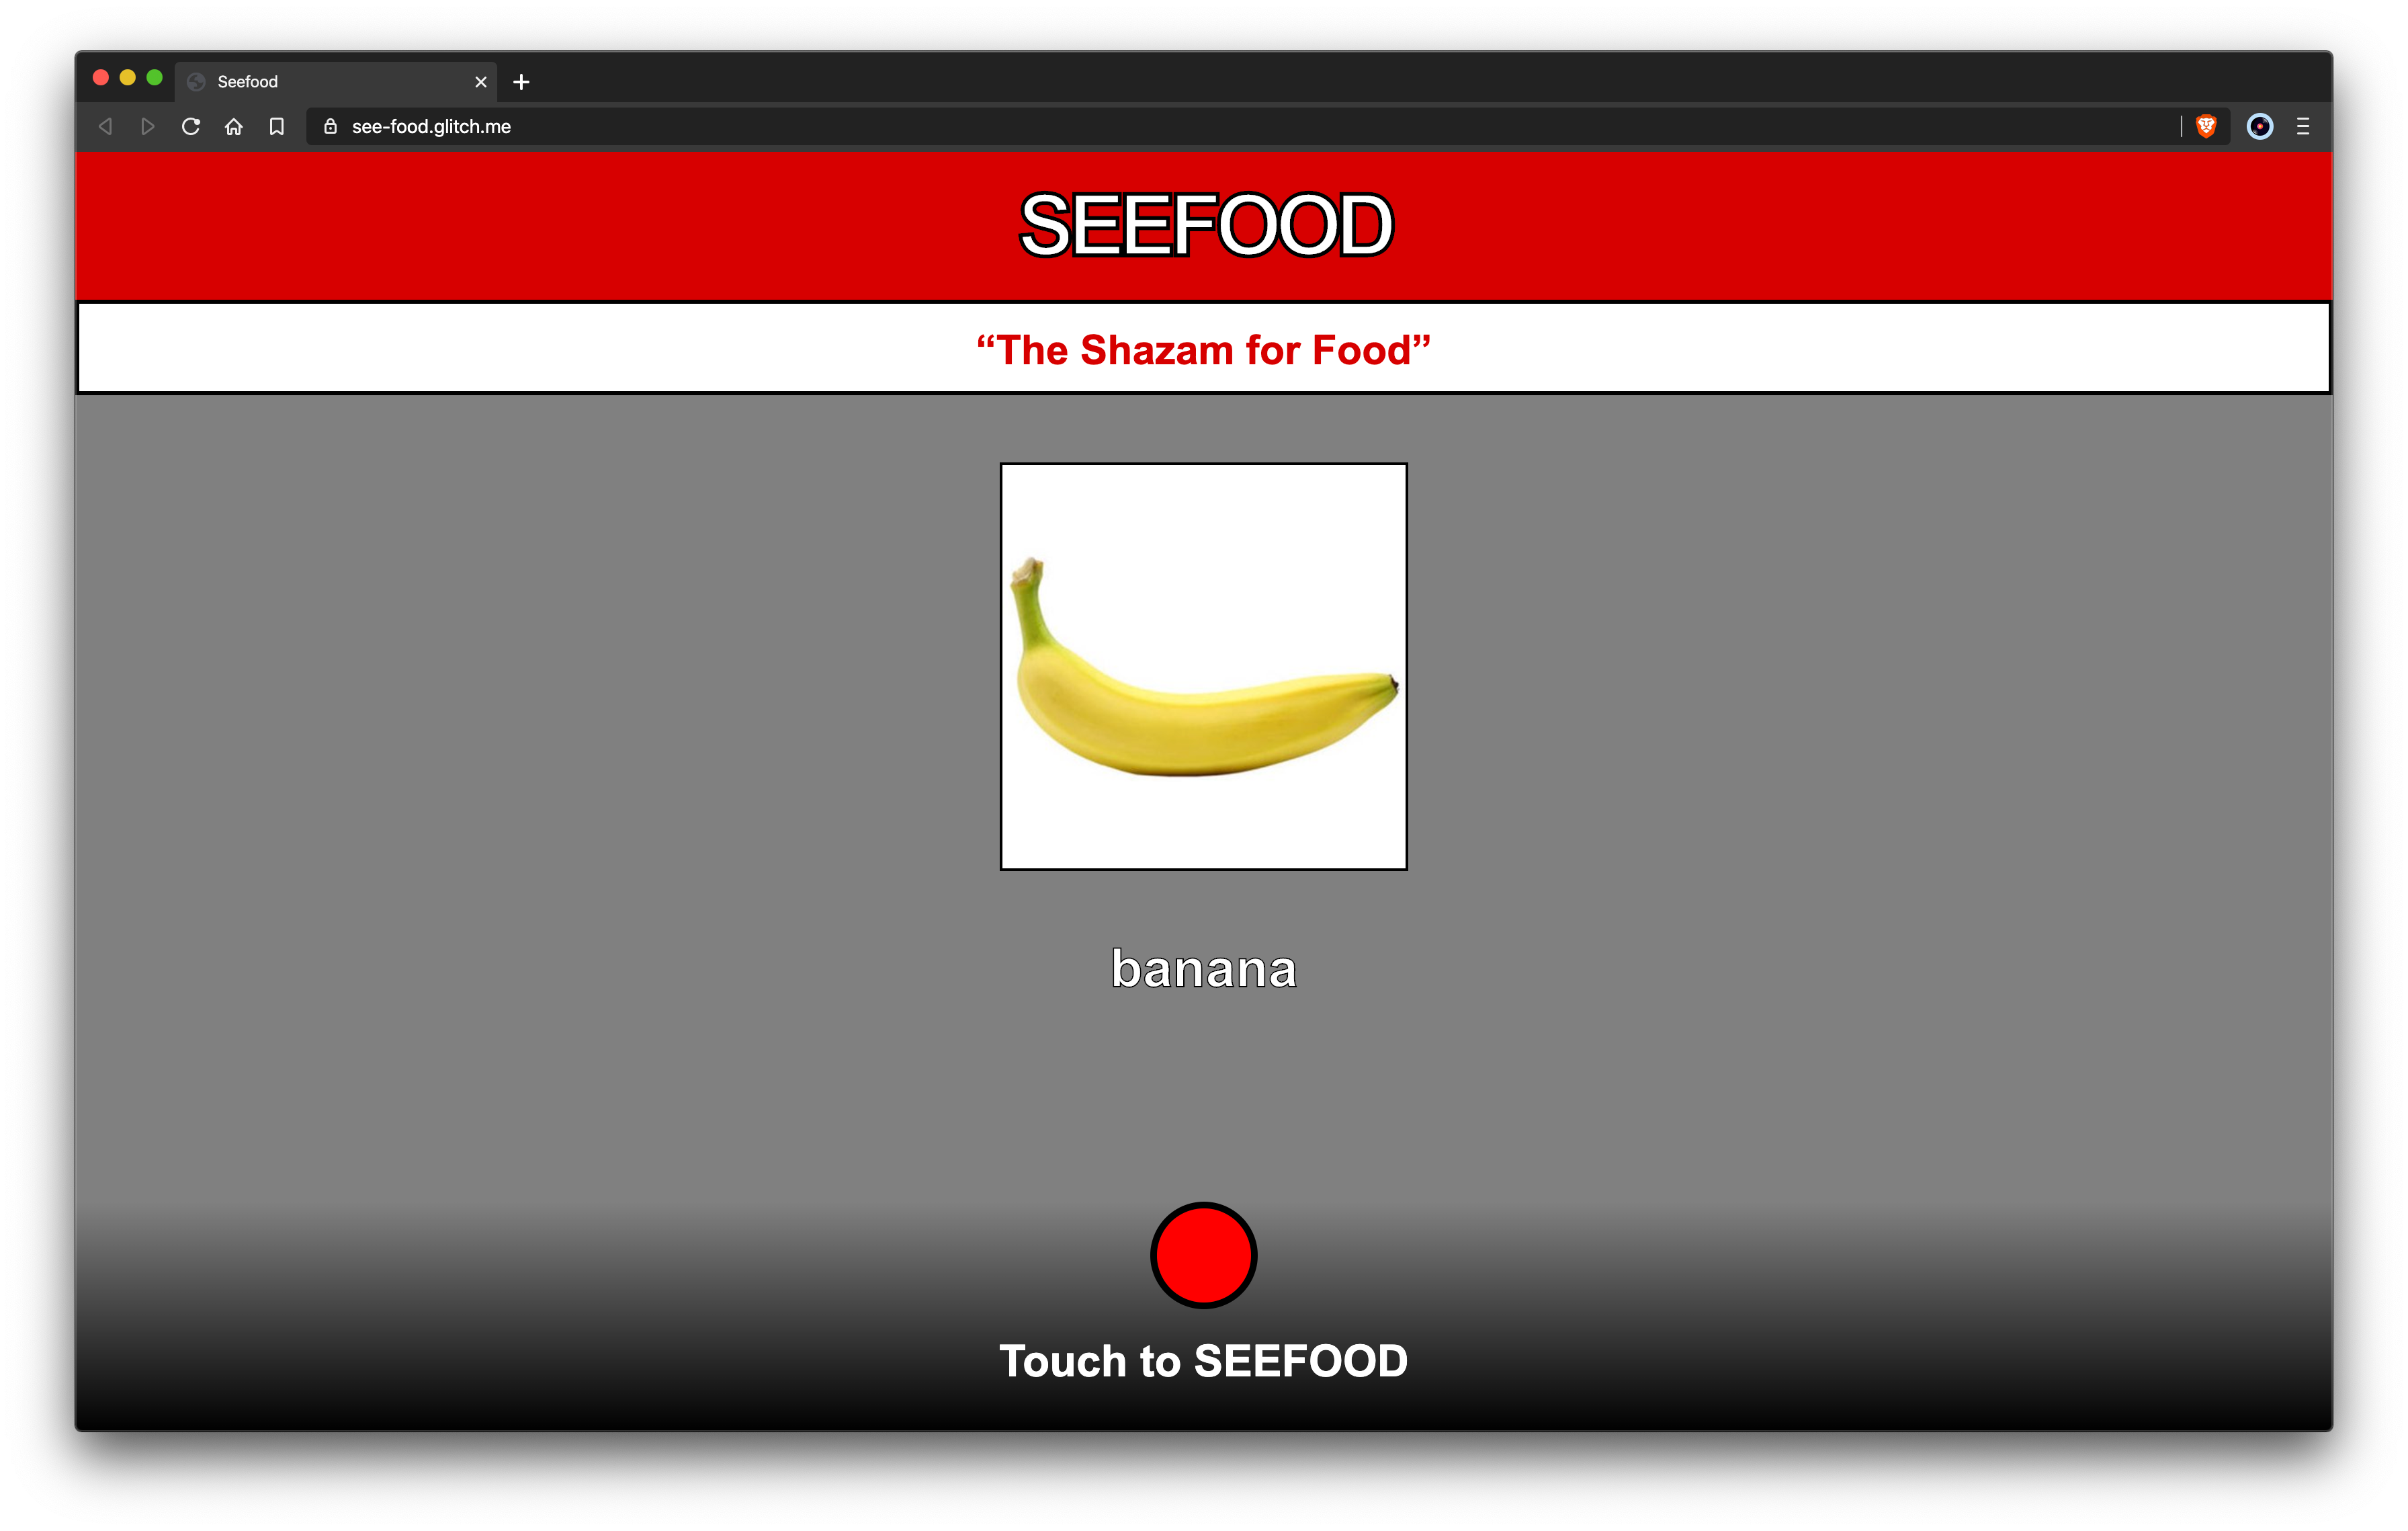 The Shazam for Food ([https://see-food.glitch.me/](https://see-food.glitch.me/))